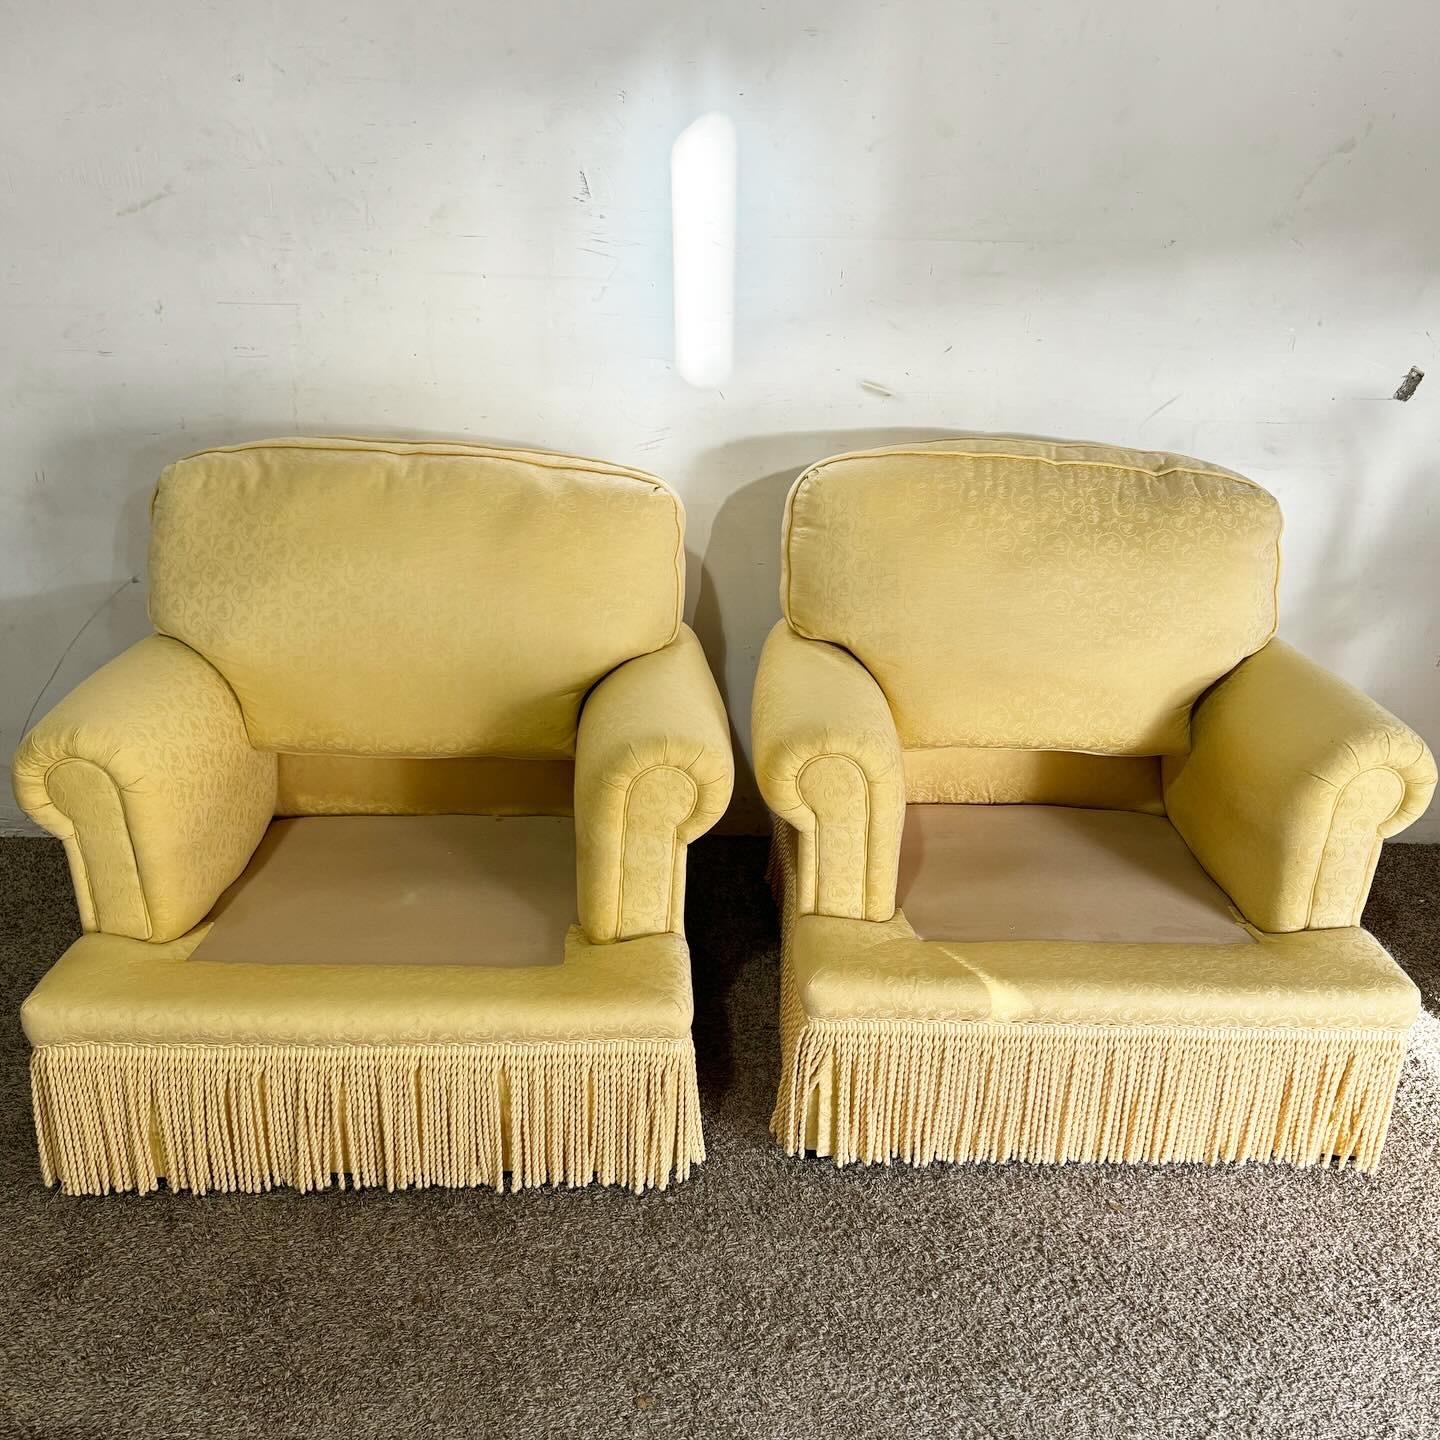 Regency Yellow Fabric Arm Chairs With Pillows and Covers - a Pair For Sale 3